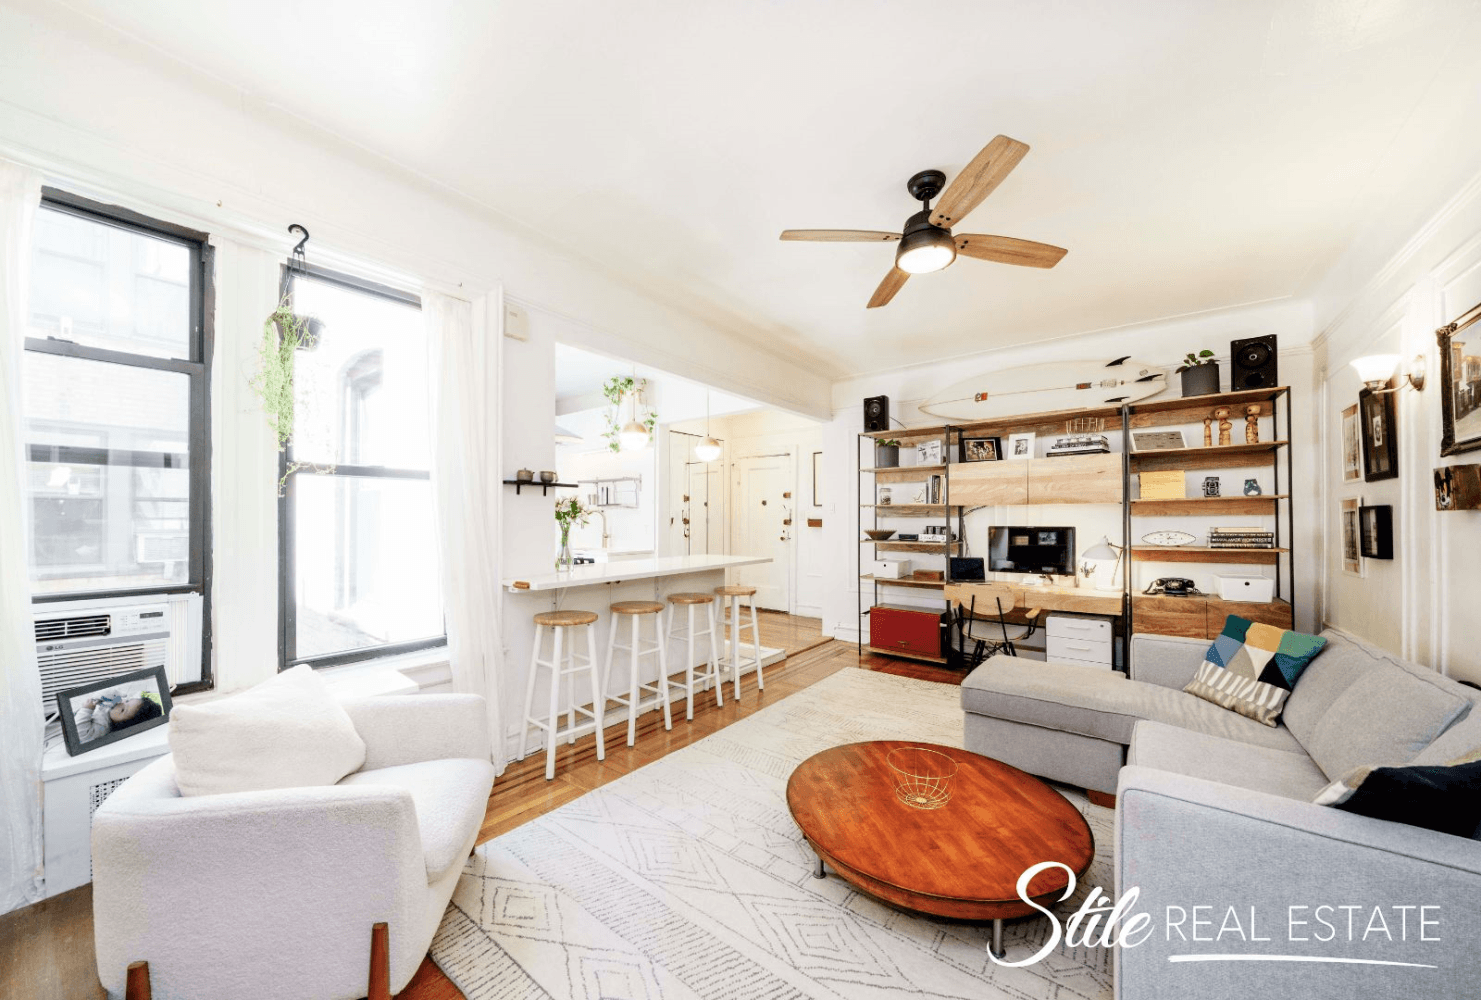 Classic meets Modern ! Relax in this spacious, Prewar apartment with a large foyer, original details, hardwood floors, high ceilings, abundant closet space and a marble tiled, windowed bathroom.